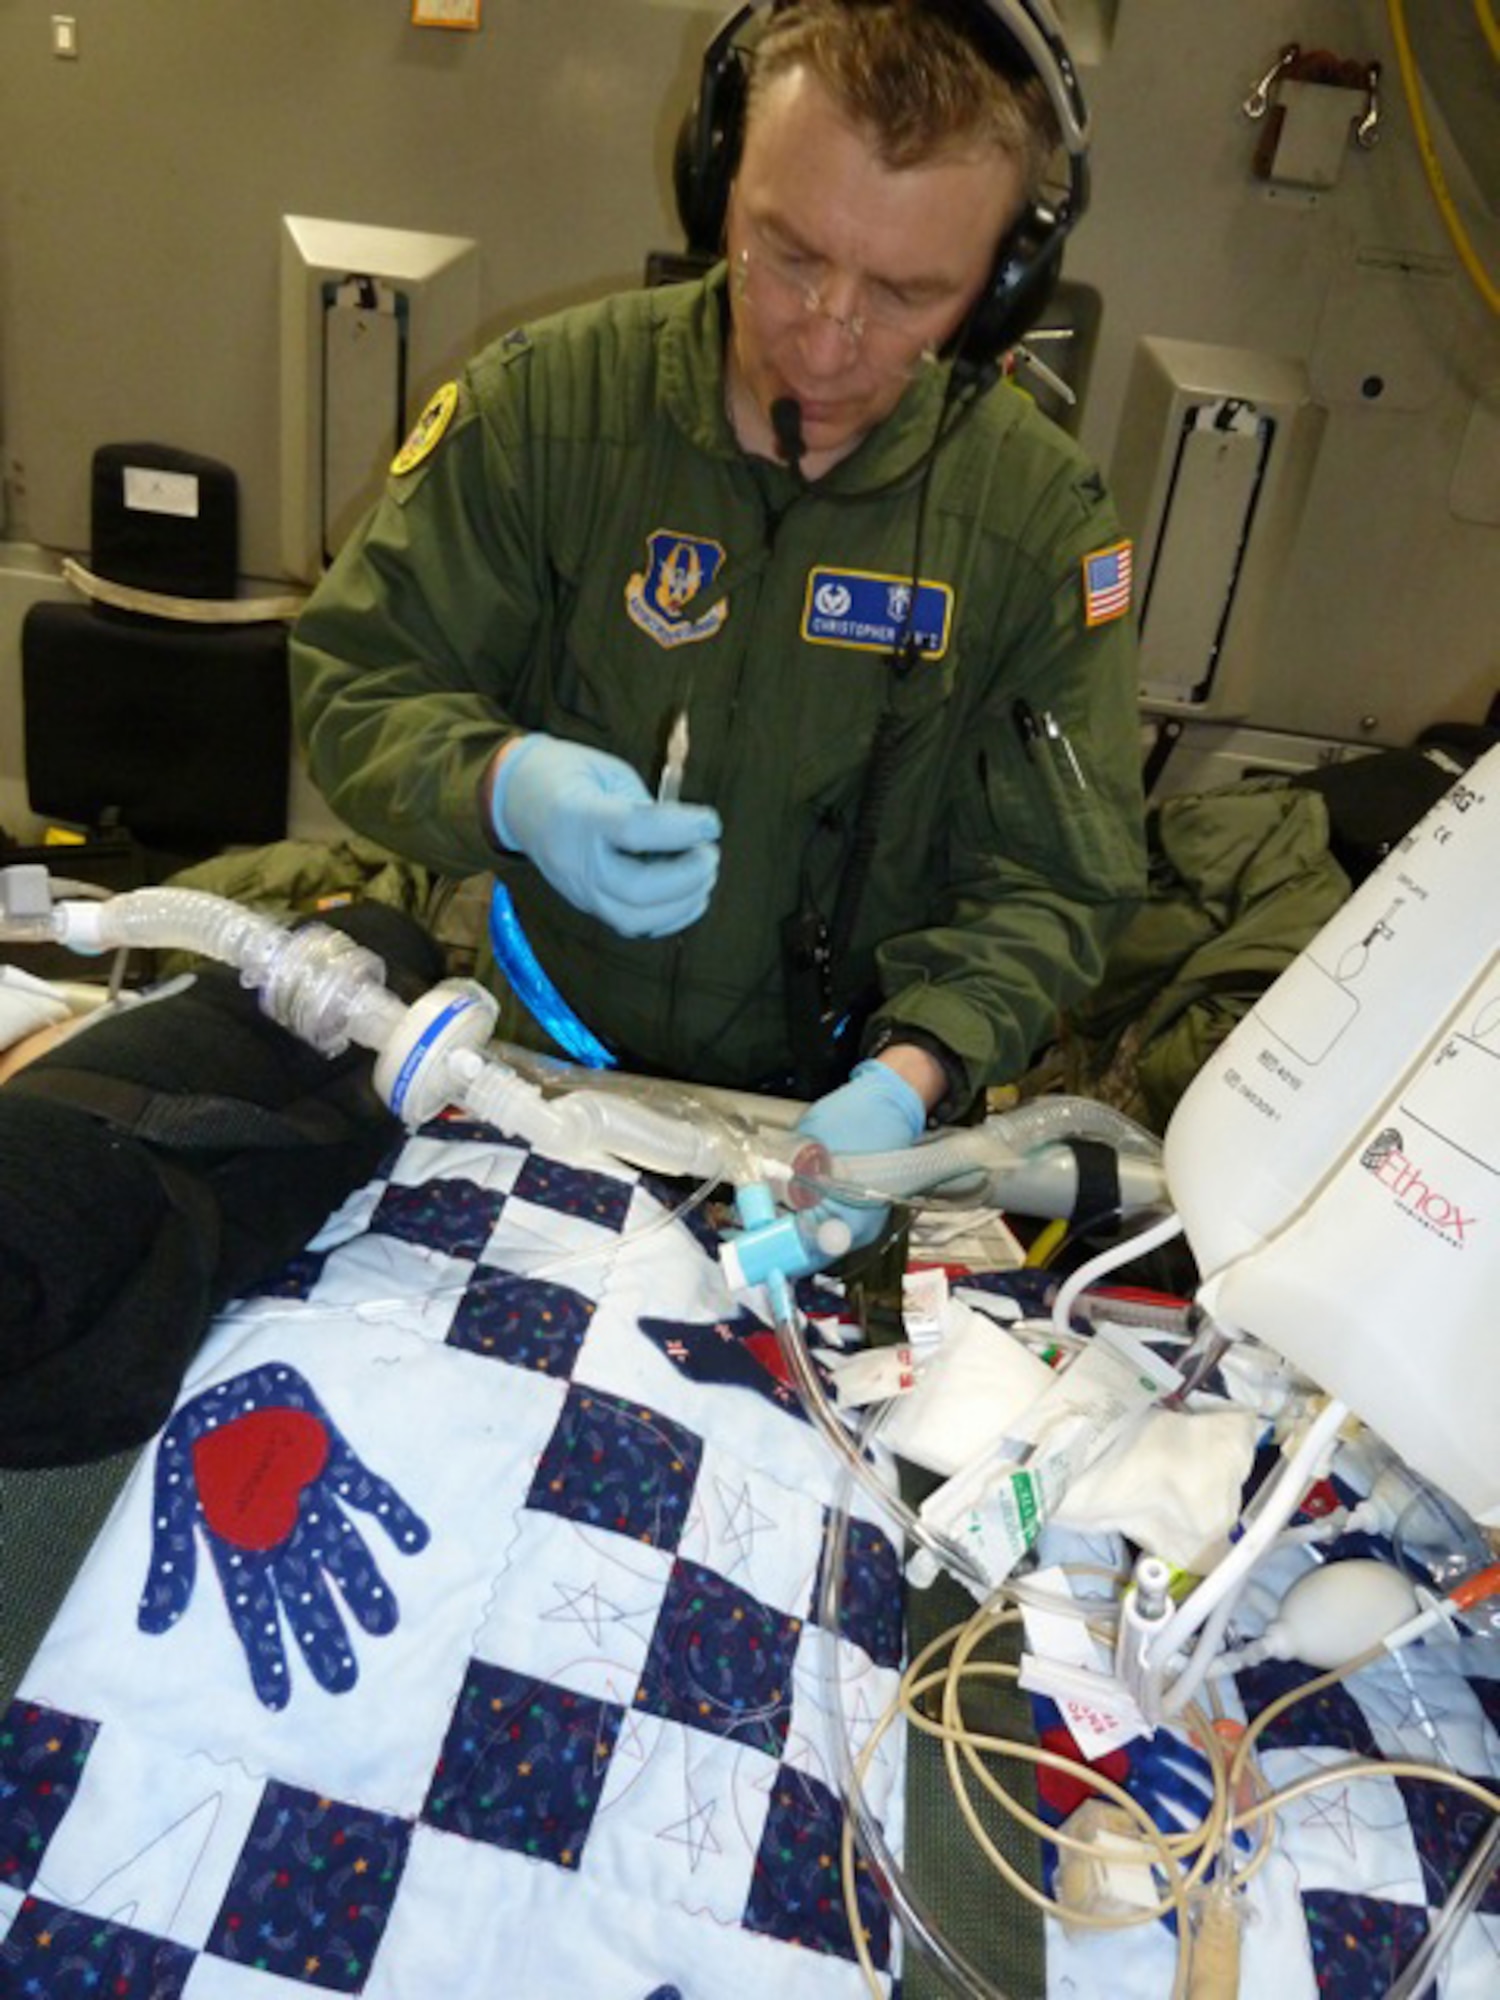 315th Aerospace Medicine Squadron Commander Col. Christopher "Doc" Lentz administers medication to one of his patients furing an aeromedical evacuation from Germany to the United States aboard a C-17. (Air Force Photo/315th Airlift Wing)
